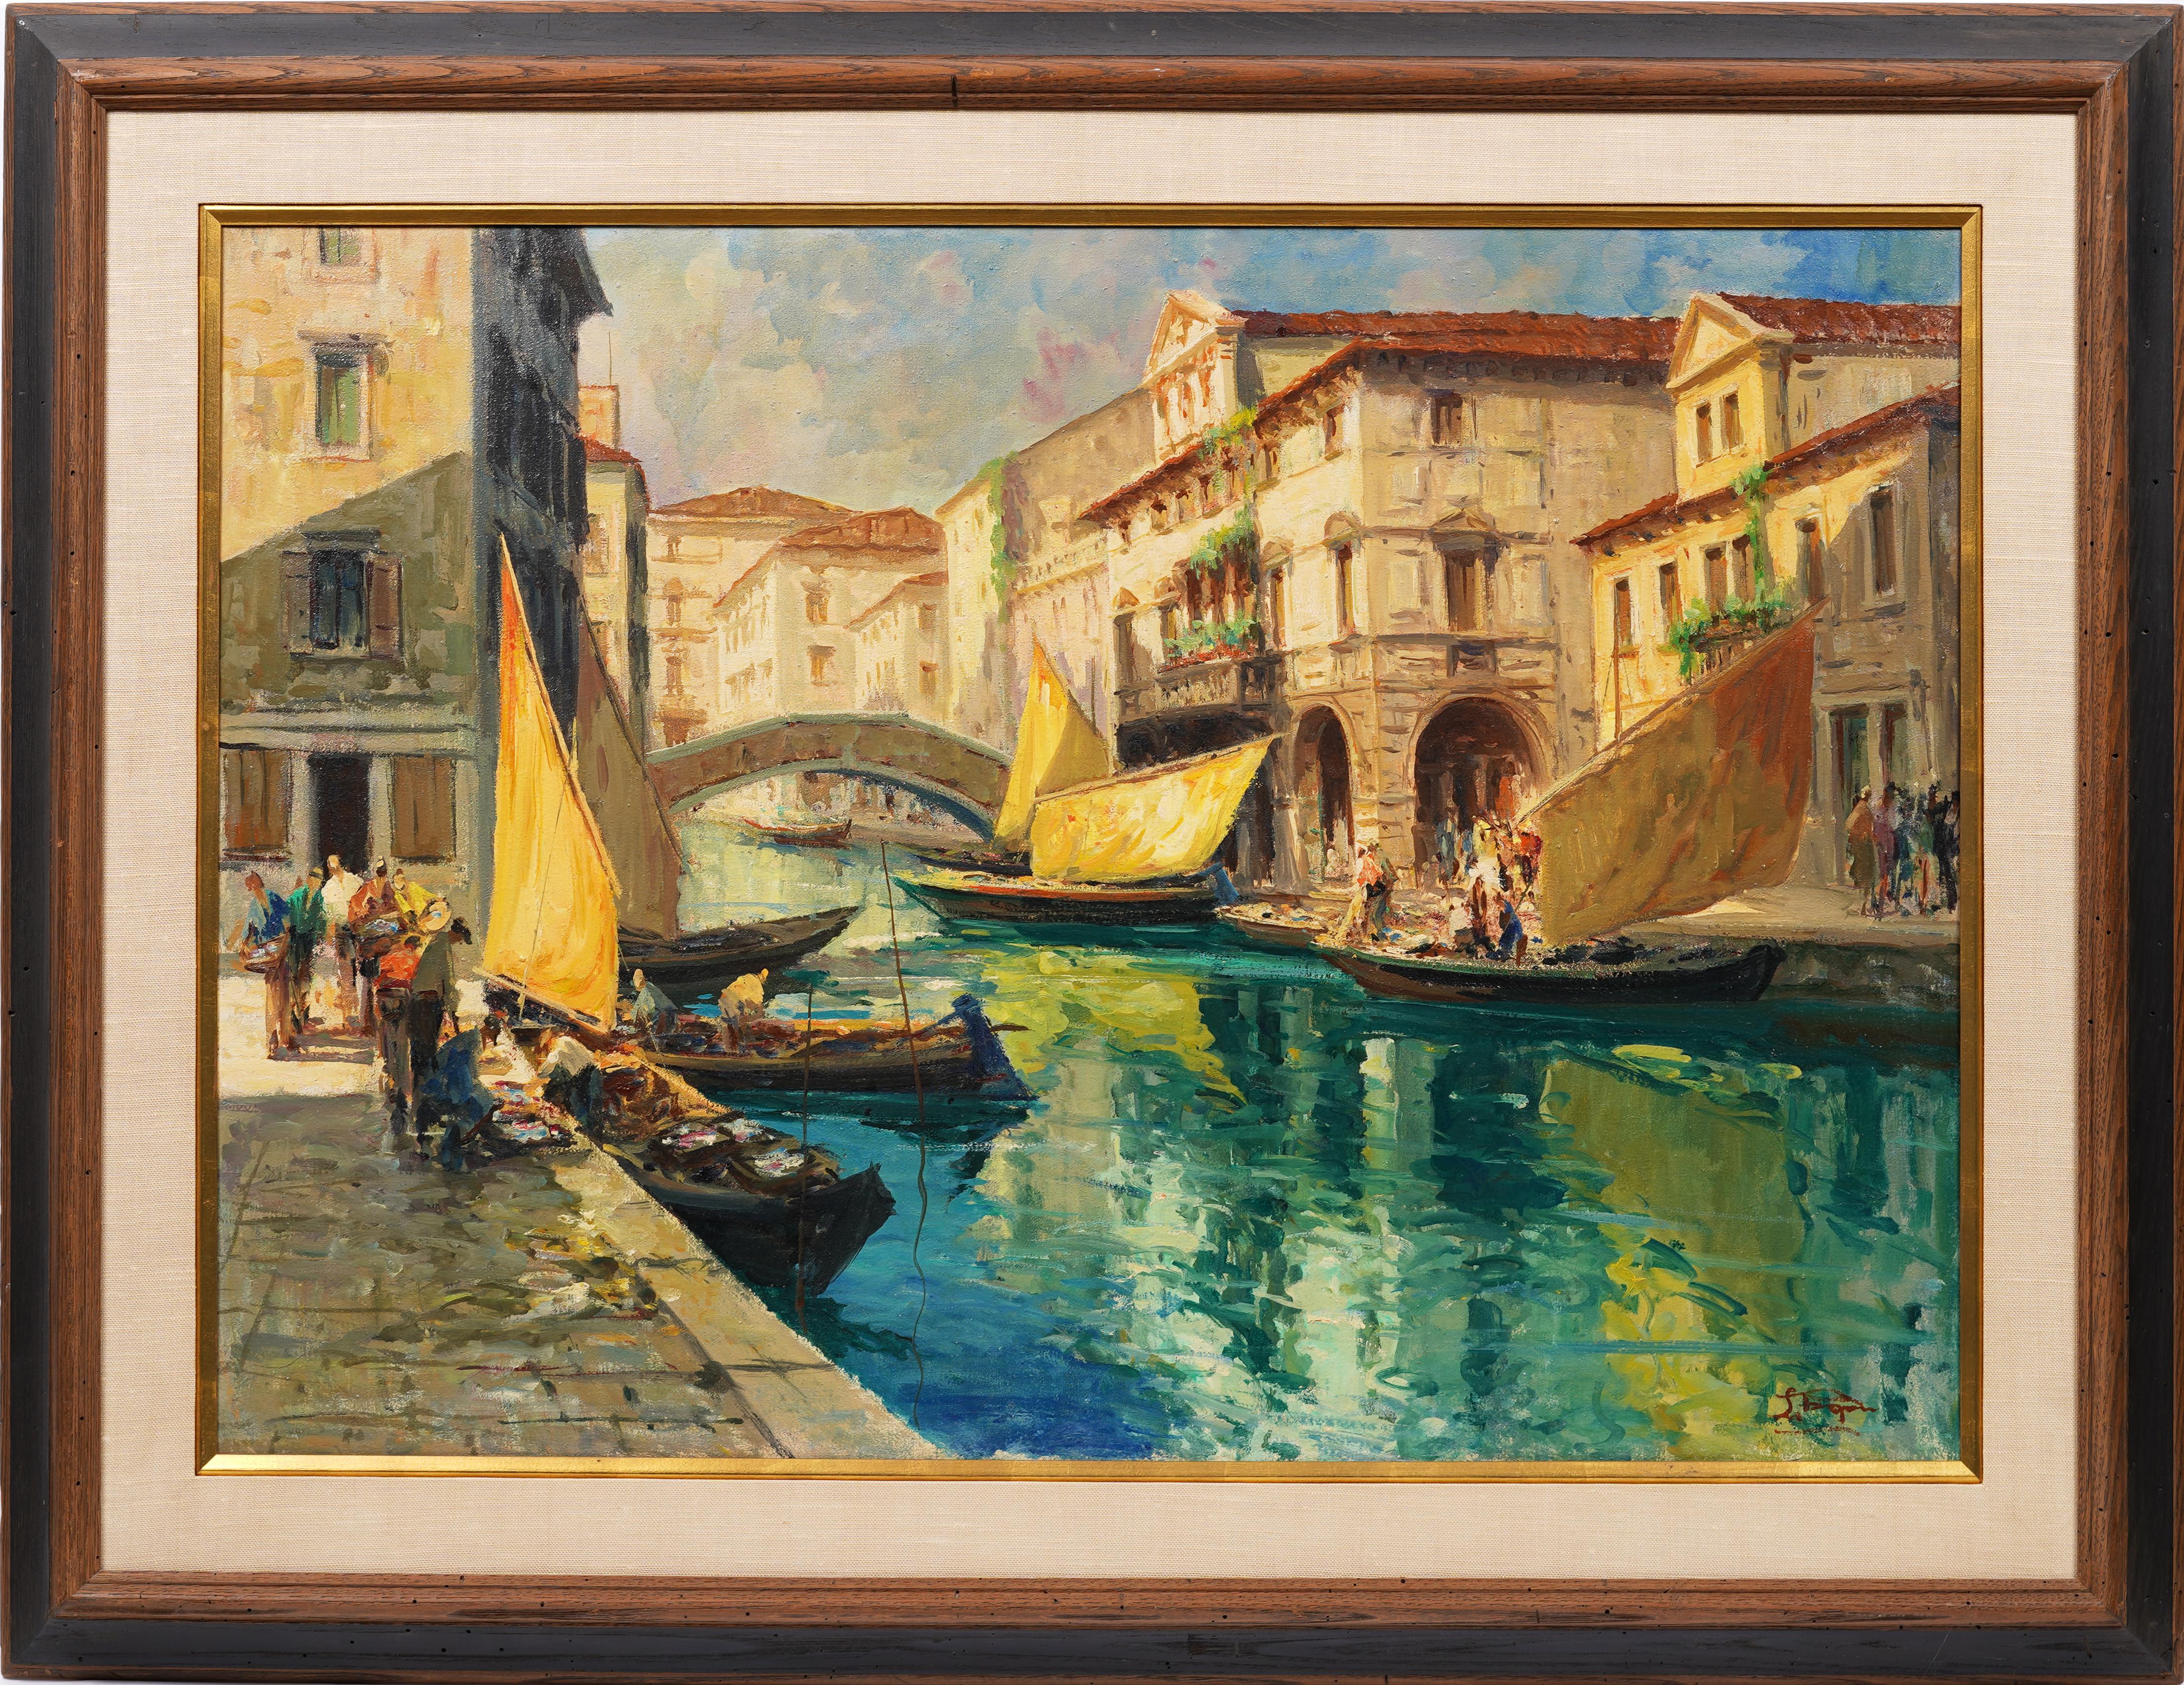 Antique American impressionist venice cityscape.  Oil on canvas.  Framed.  Signed.  


